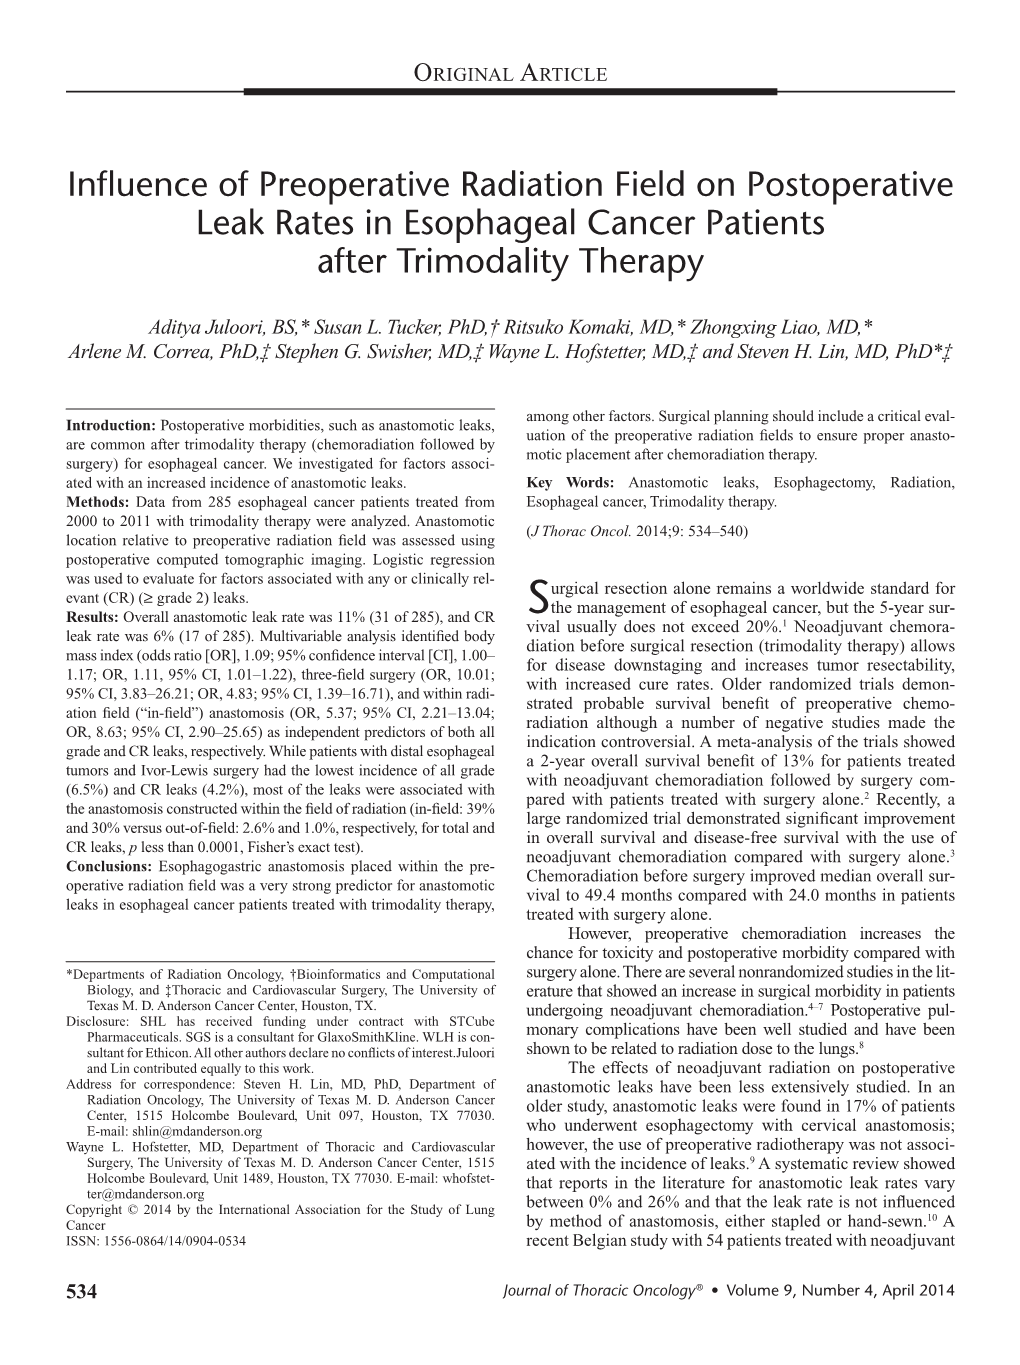 Influence of Preoperative Radiation Field on Postoperative Leak Rates in Esophageal Cancer Patients After Trimodality Therapy